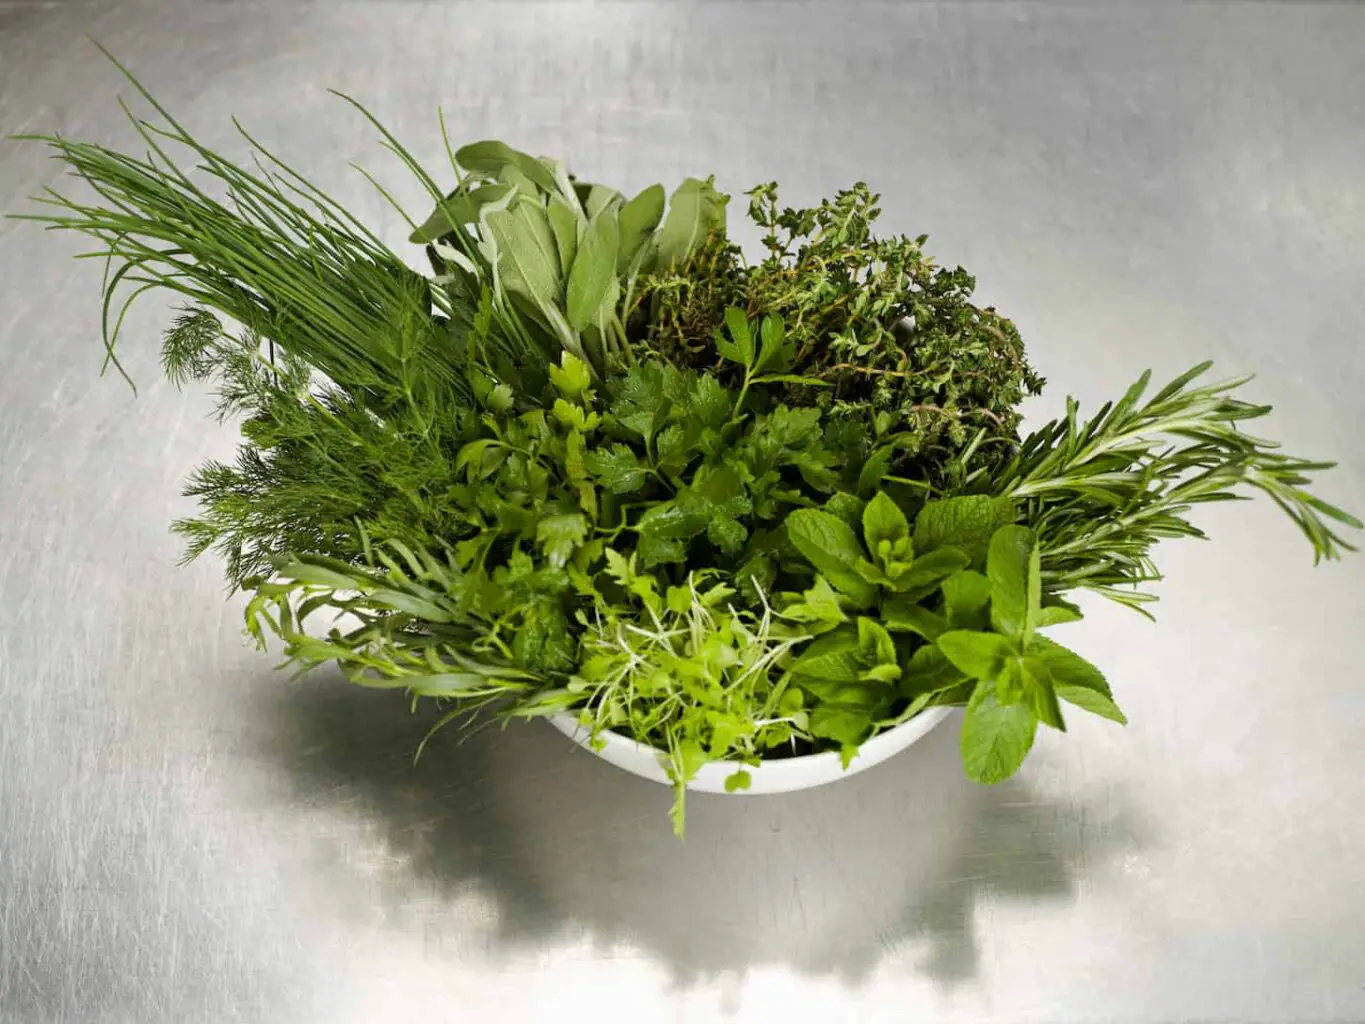 An image of a bowl of fresh herbs.